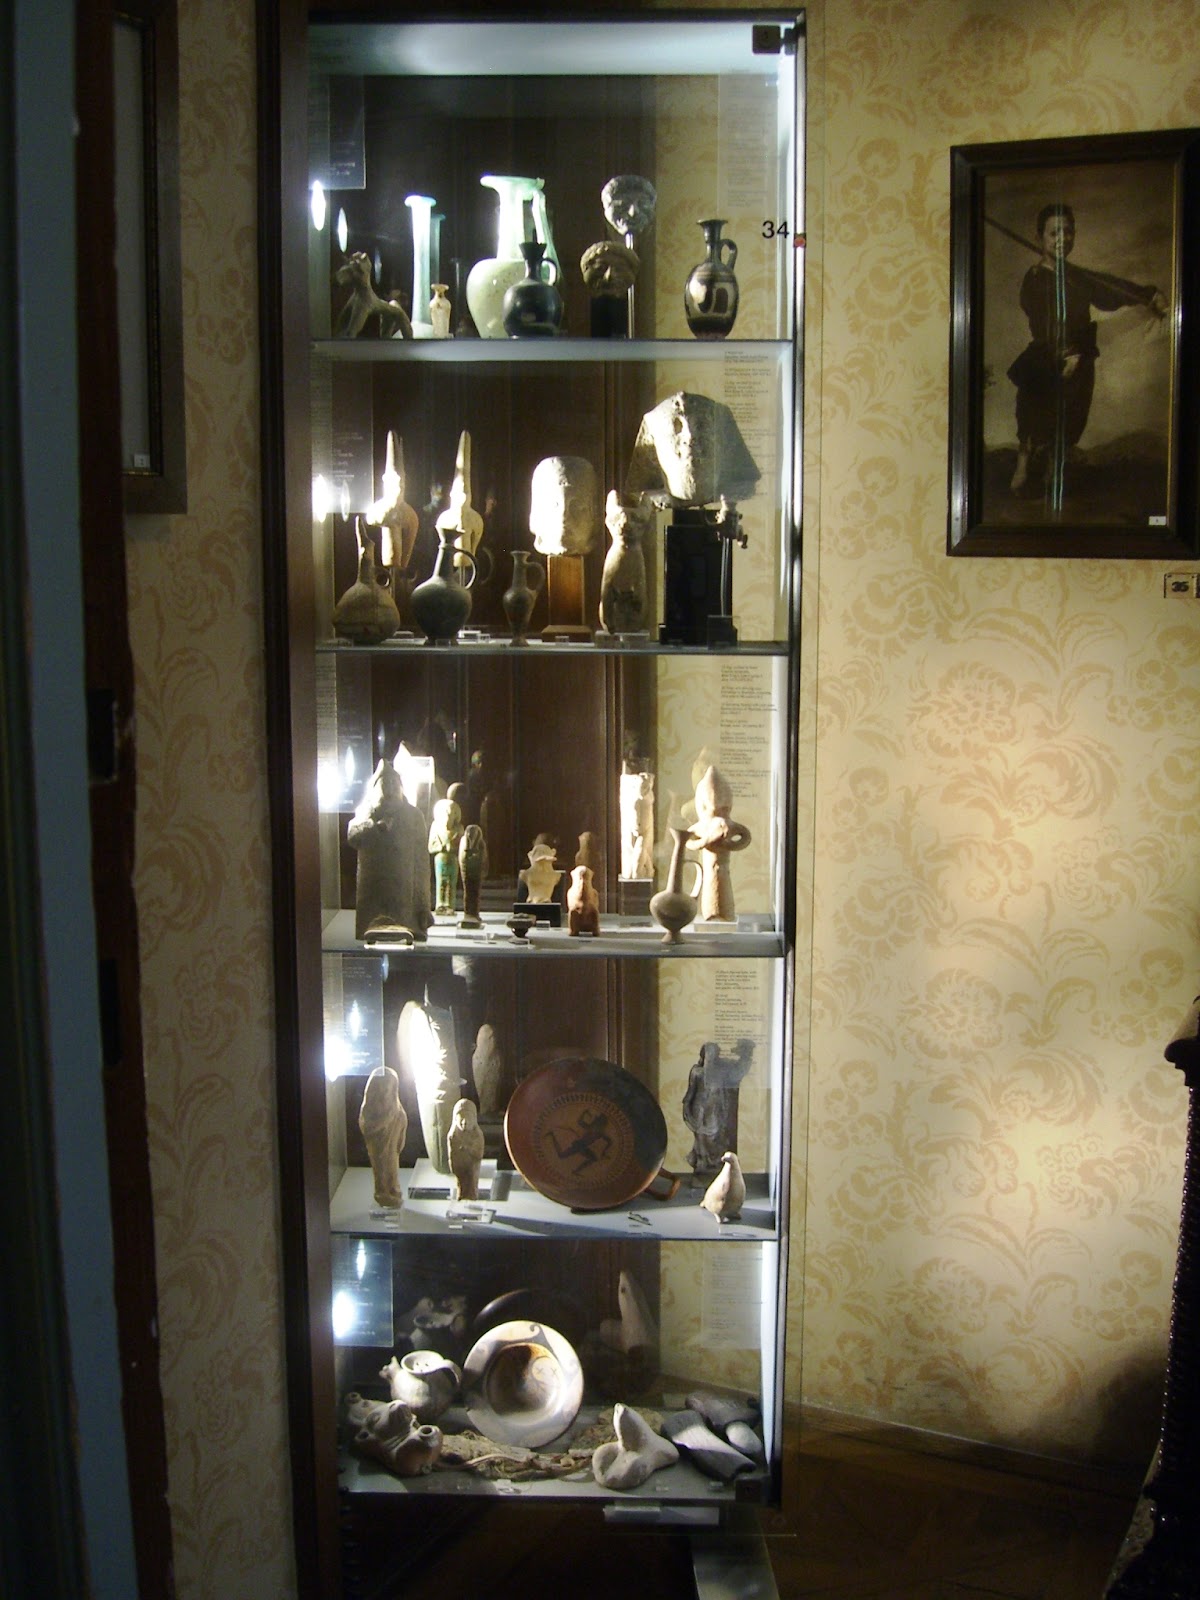 Light can be custom fit to any glass cabinet regardless of design. Source: Wikimedia Commons